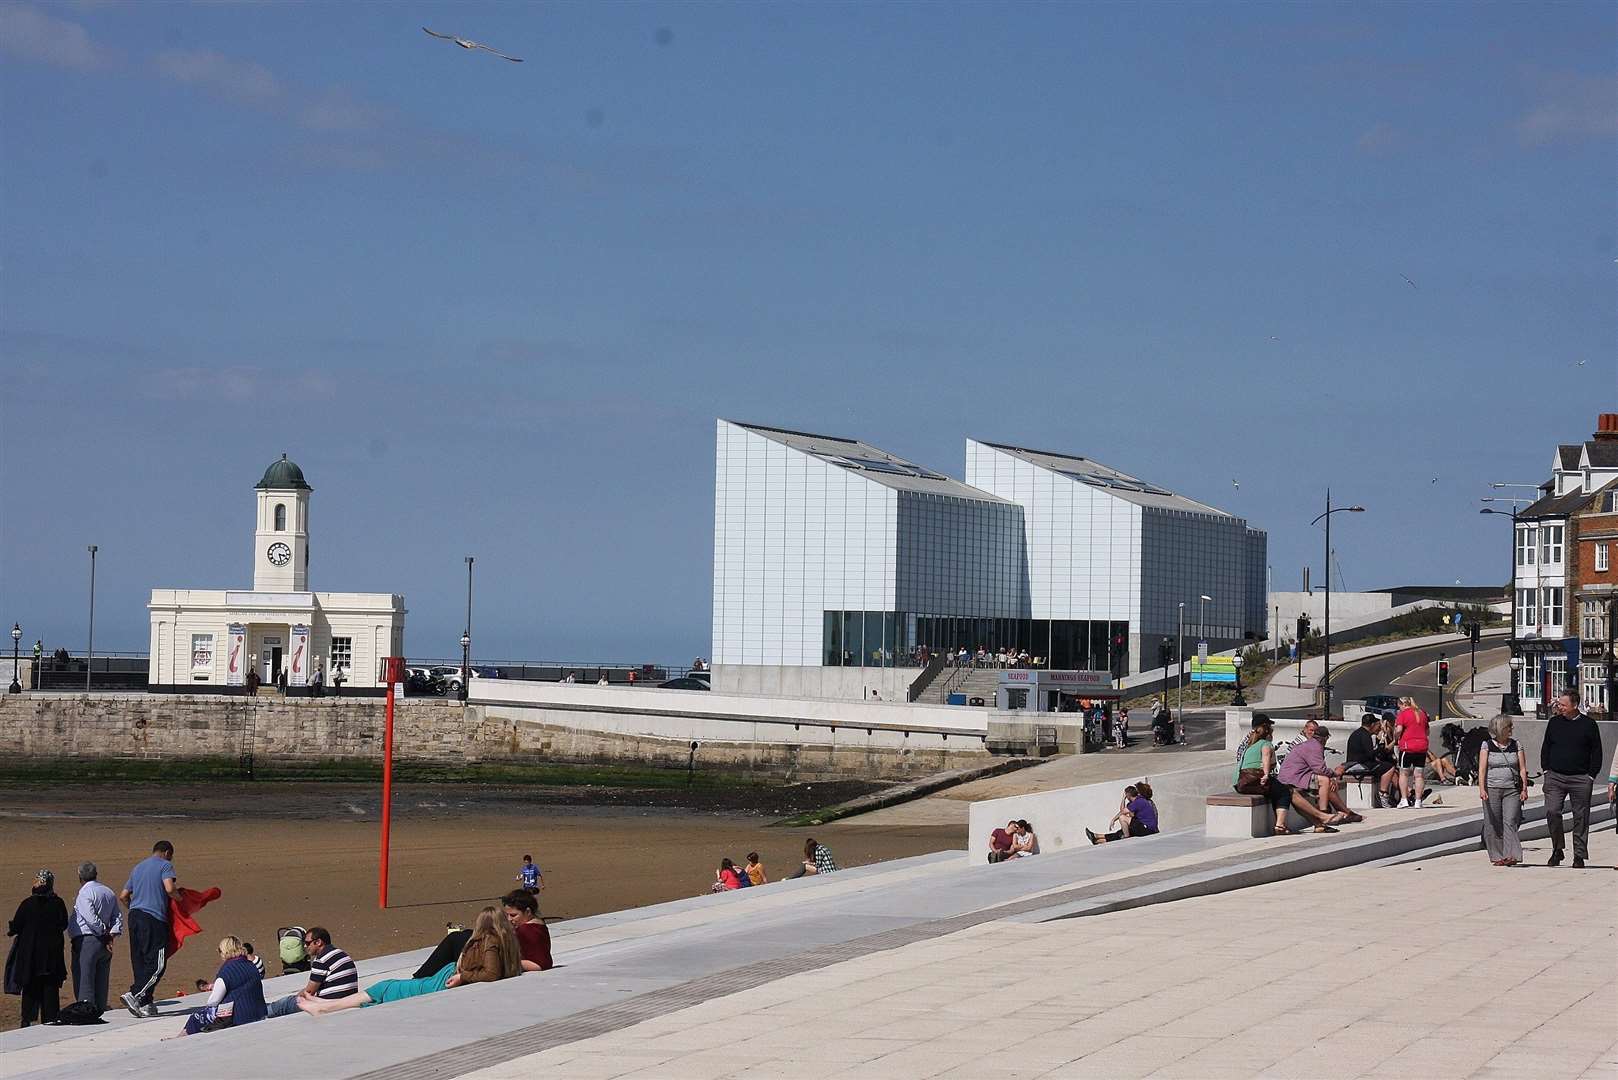 Art galleries such as the Turner Contemporary in Margate will be able to reopen with social distancing rules in place